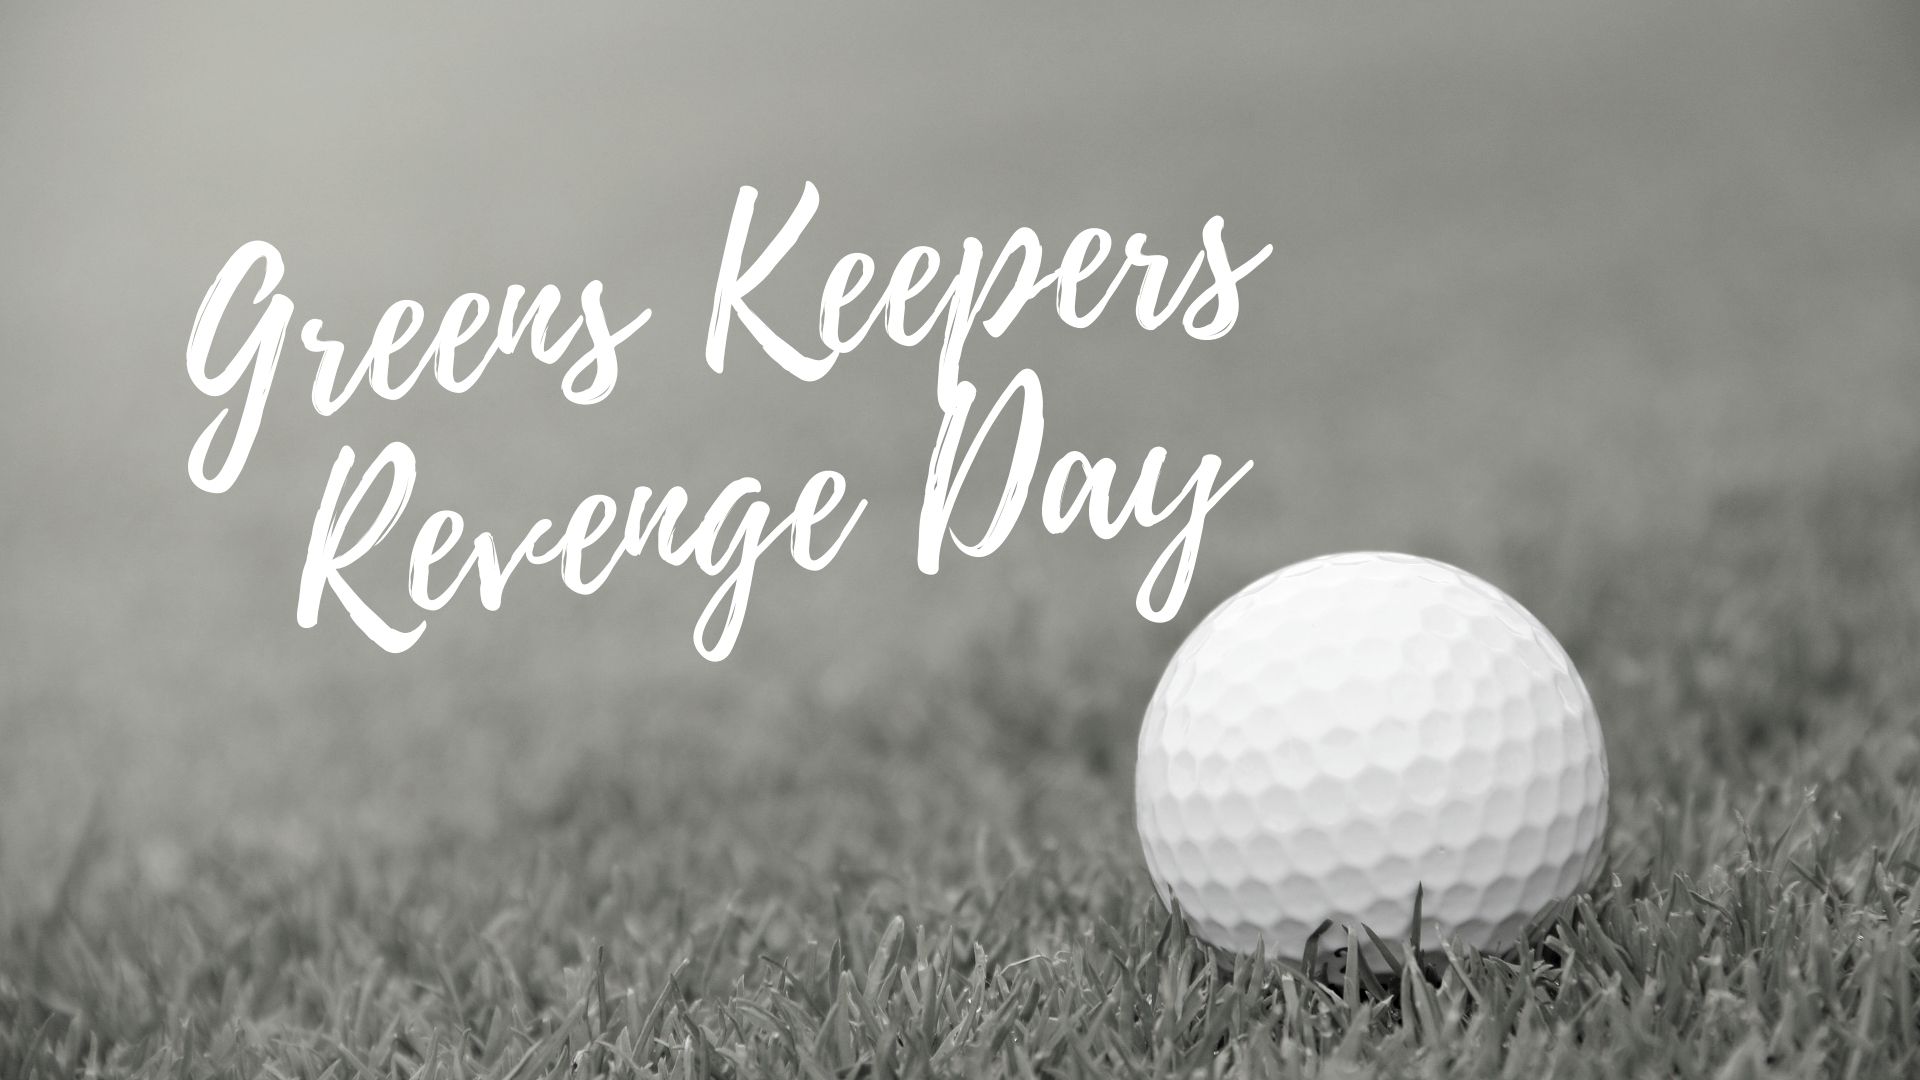 Greens Keepers Revenge Day At River Oaks Golf Course River Oaks Municipal